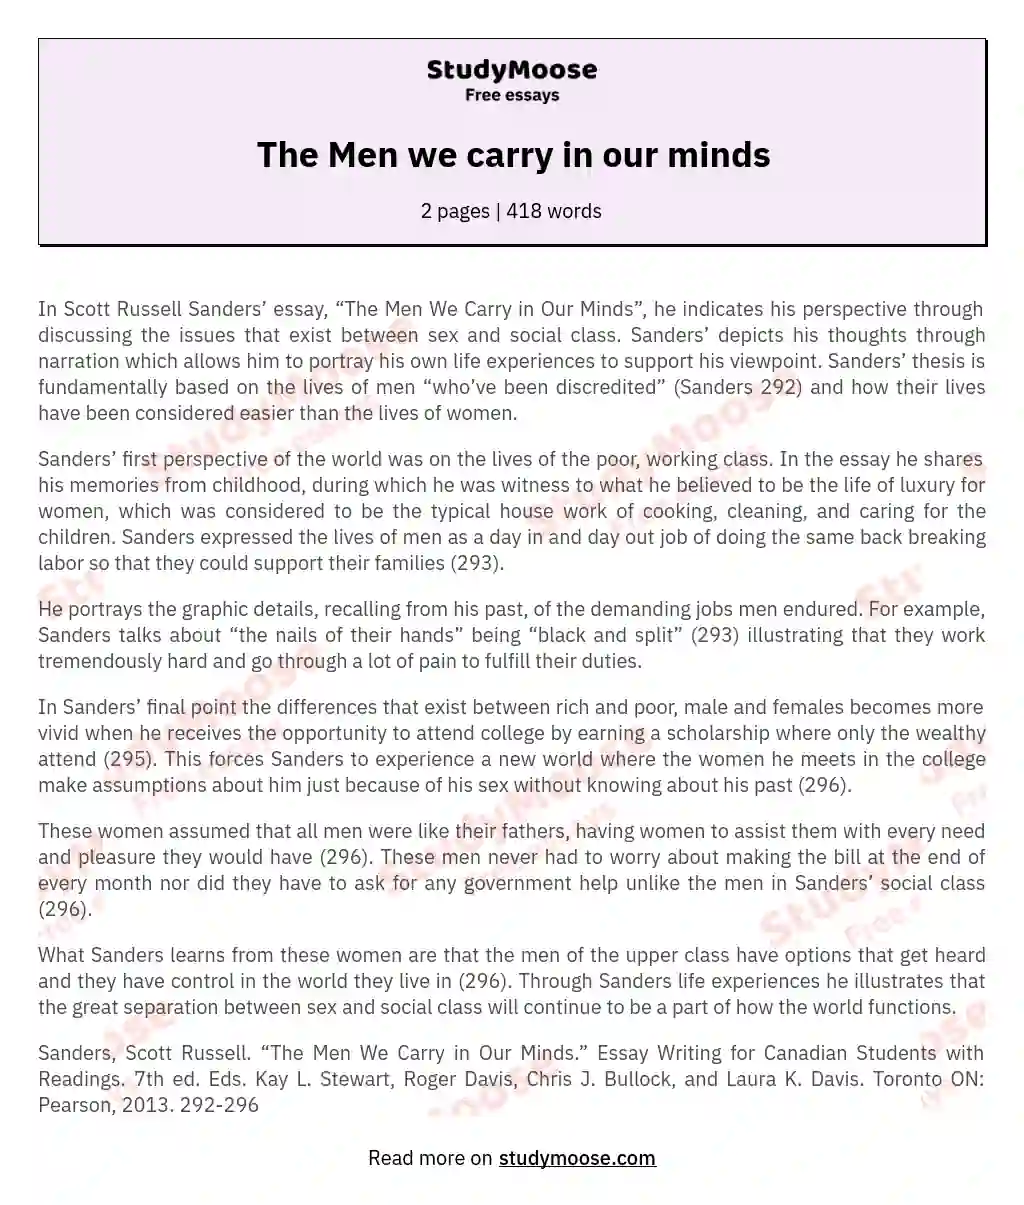 Gender and Class Disparities in "The Men We Carry in Our Minds" essay